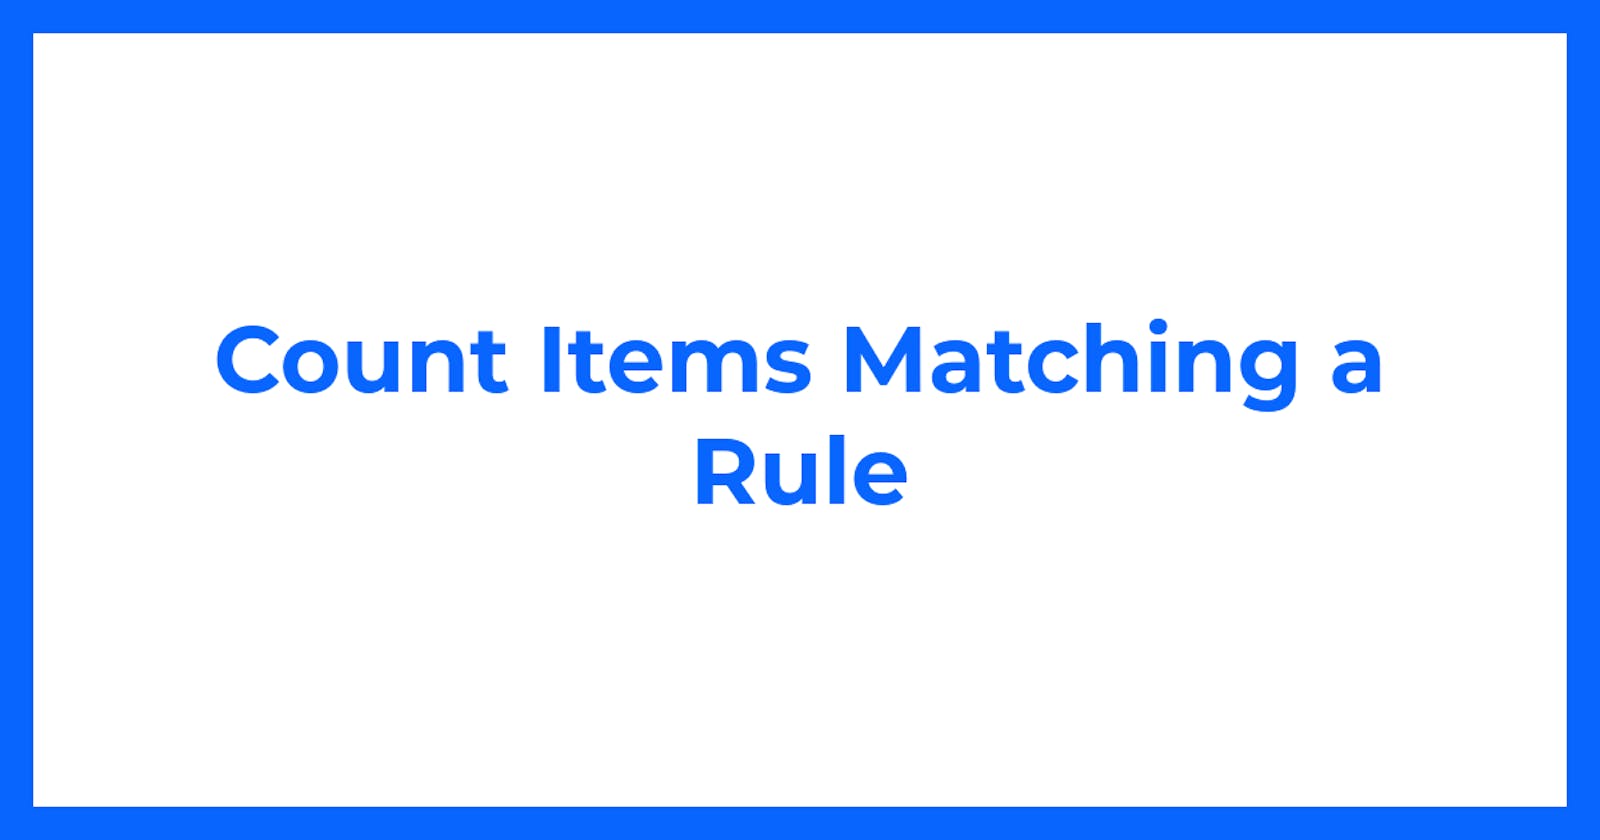 Count Items Matching a Rule